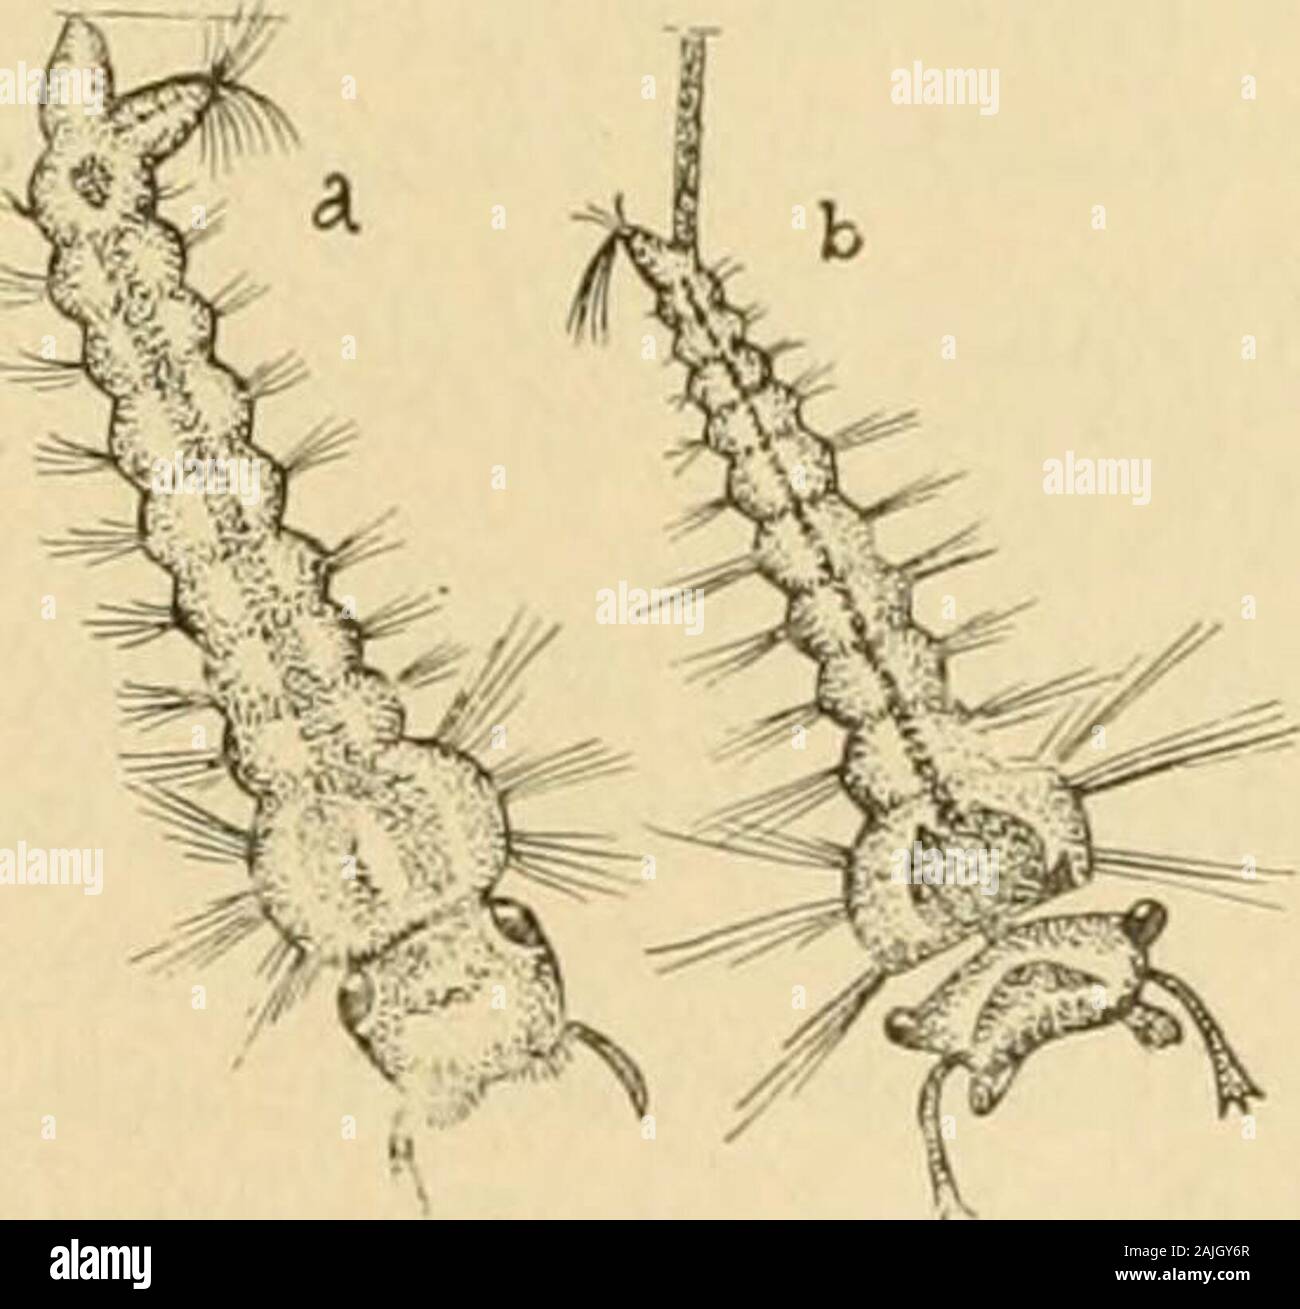 Transactions of the Connecticut Academy of Arts and Sciences . Figure 94.—Mosquito {Culex, sp.); A, larva ; B, pupa ; o, caudal appendage; d,thoracic spiracles ; much enlarged ; after Packard. Figure 95.—a, Larvaof Yellow-fever Mosquito {Stegomyia fasciata); h, larva of Culex fatigans ;both much enlarged ; after Theobald. the legs conspicuously banded with gray and blackish. Another,abundant in the marshes, is a rather large species, of a nearly uni-form brownish color. 746 A. E. Verrill—The Bermuda Islands. Gray Mosquito / Culex fatigans Wied,= C. pungens Howard. Figures 95, fe; 96: 97; 98. T Stock Photo